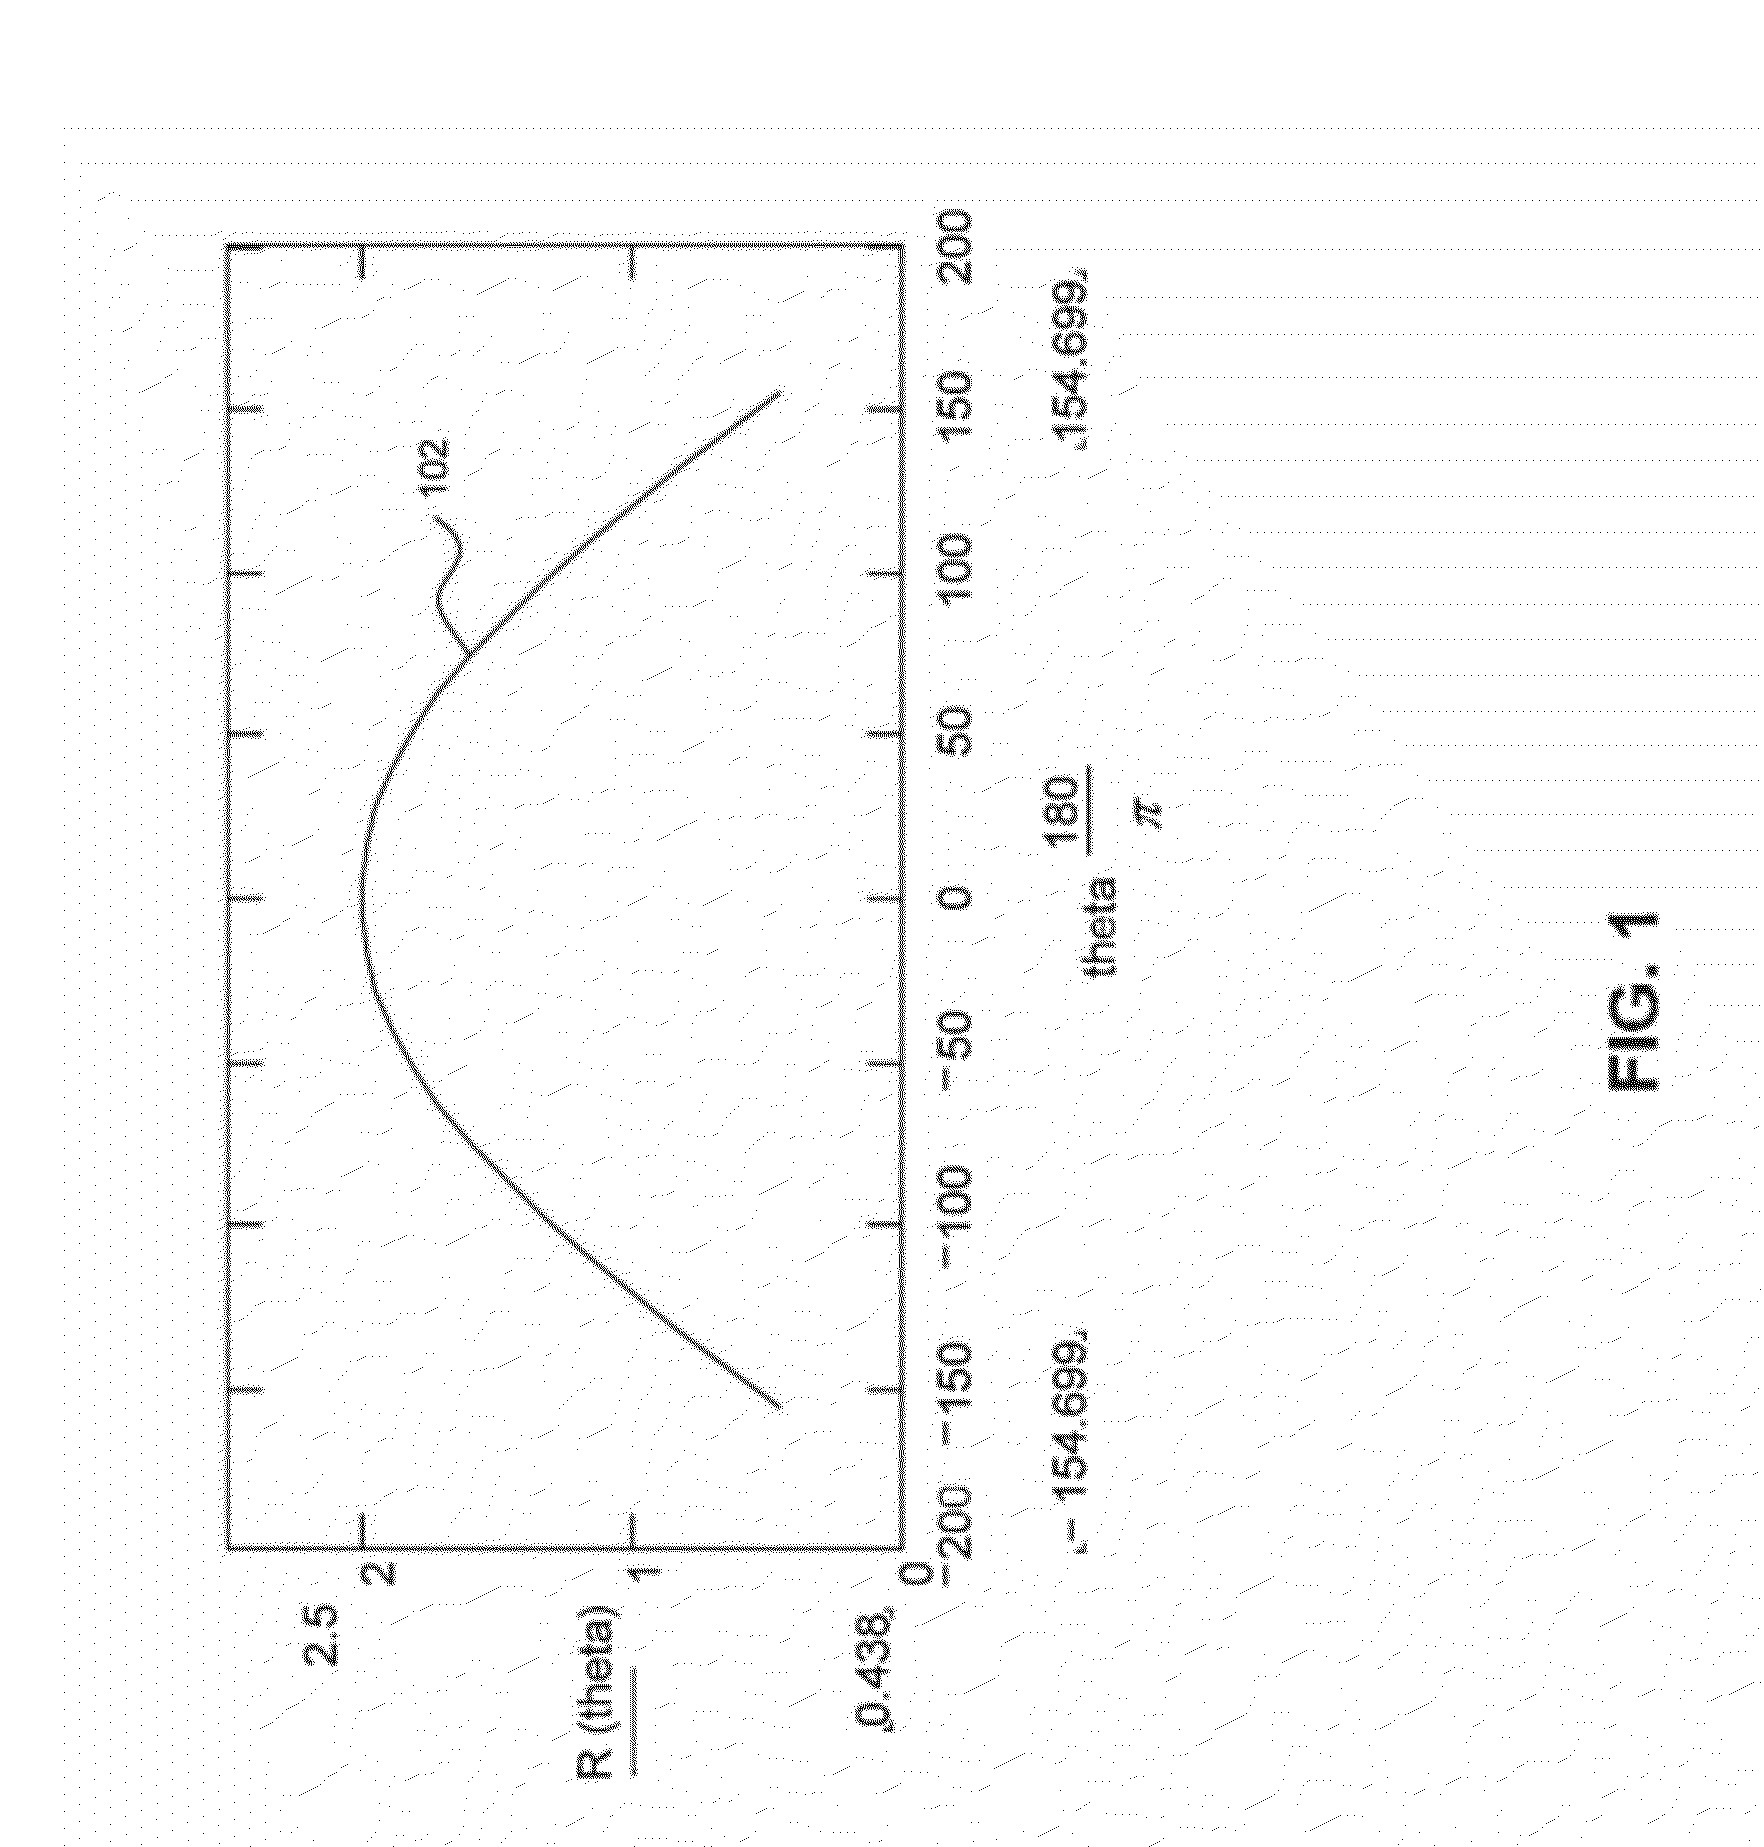 Systems and Methods of RF Power Transmission, Modulation, and Amplification, Including Varying Weights of Control Signals